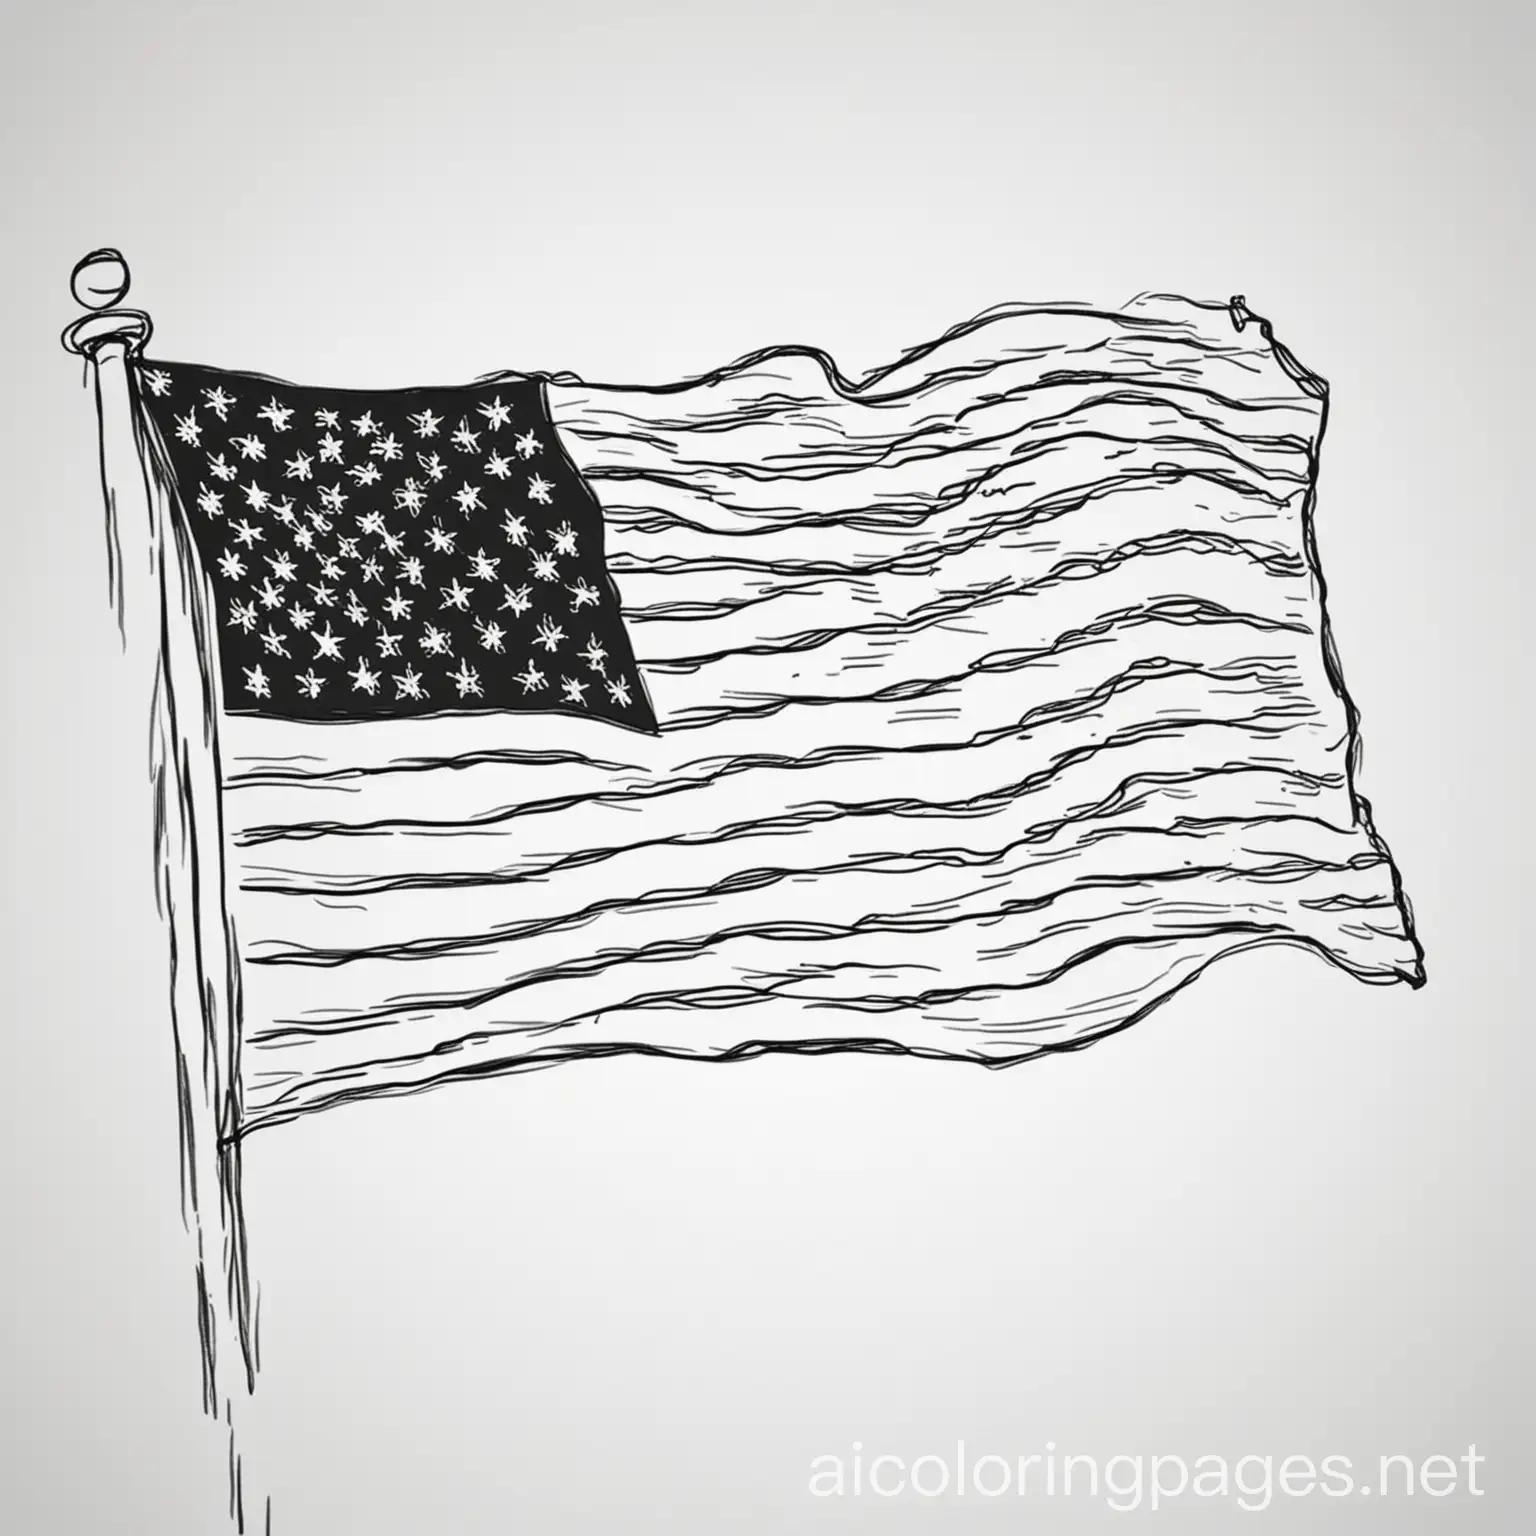 American flag, Coloring Page, black and white, line art, white background, Simplicity, Ample White Space. The background of the coloring page is plain white to make it easy for young children to color within the lines. The outlines of all the subjects are easy to distinguish, making it simple for kids to color without too much difficulty